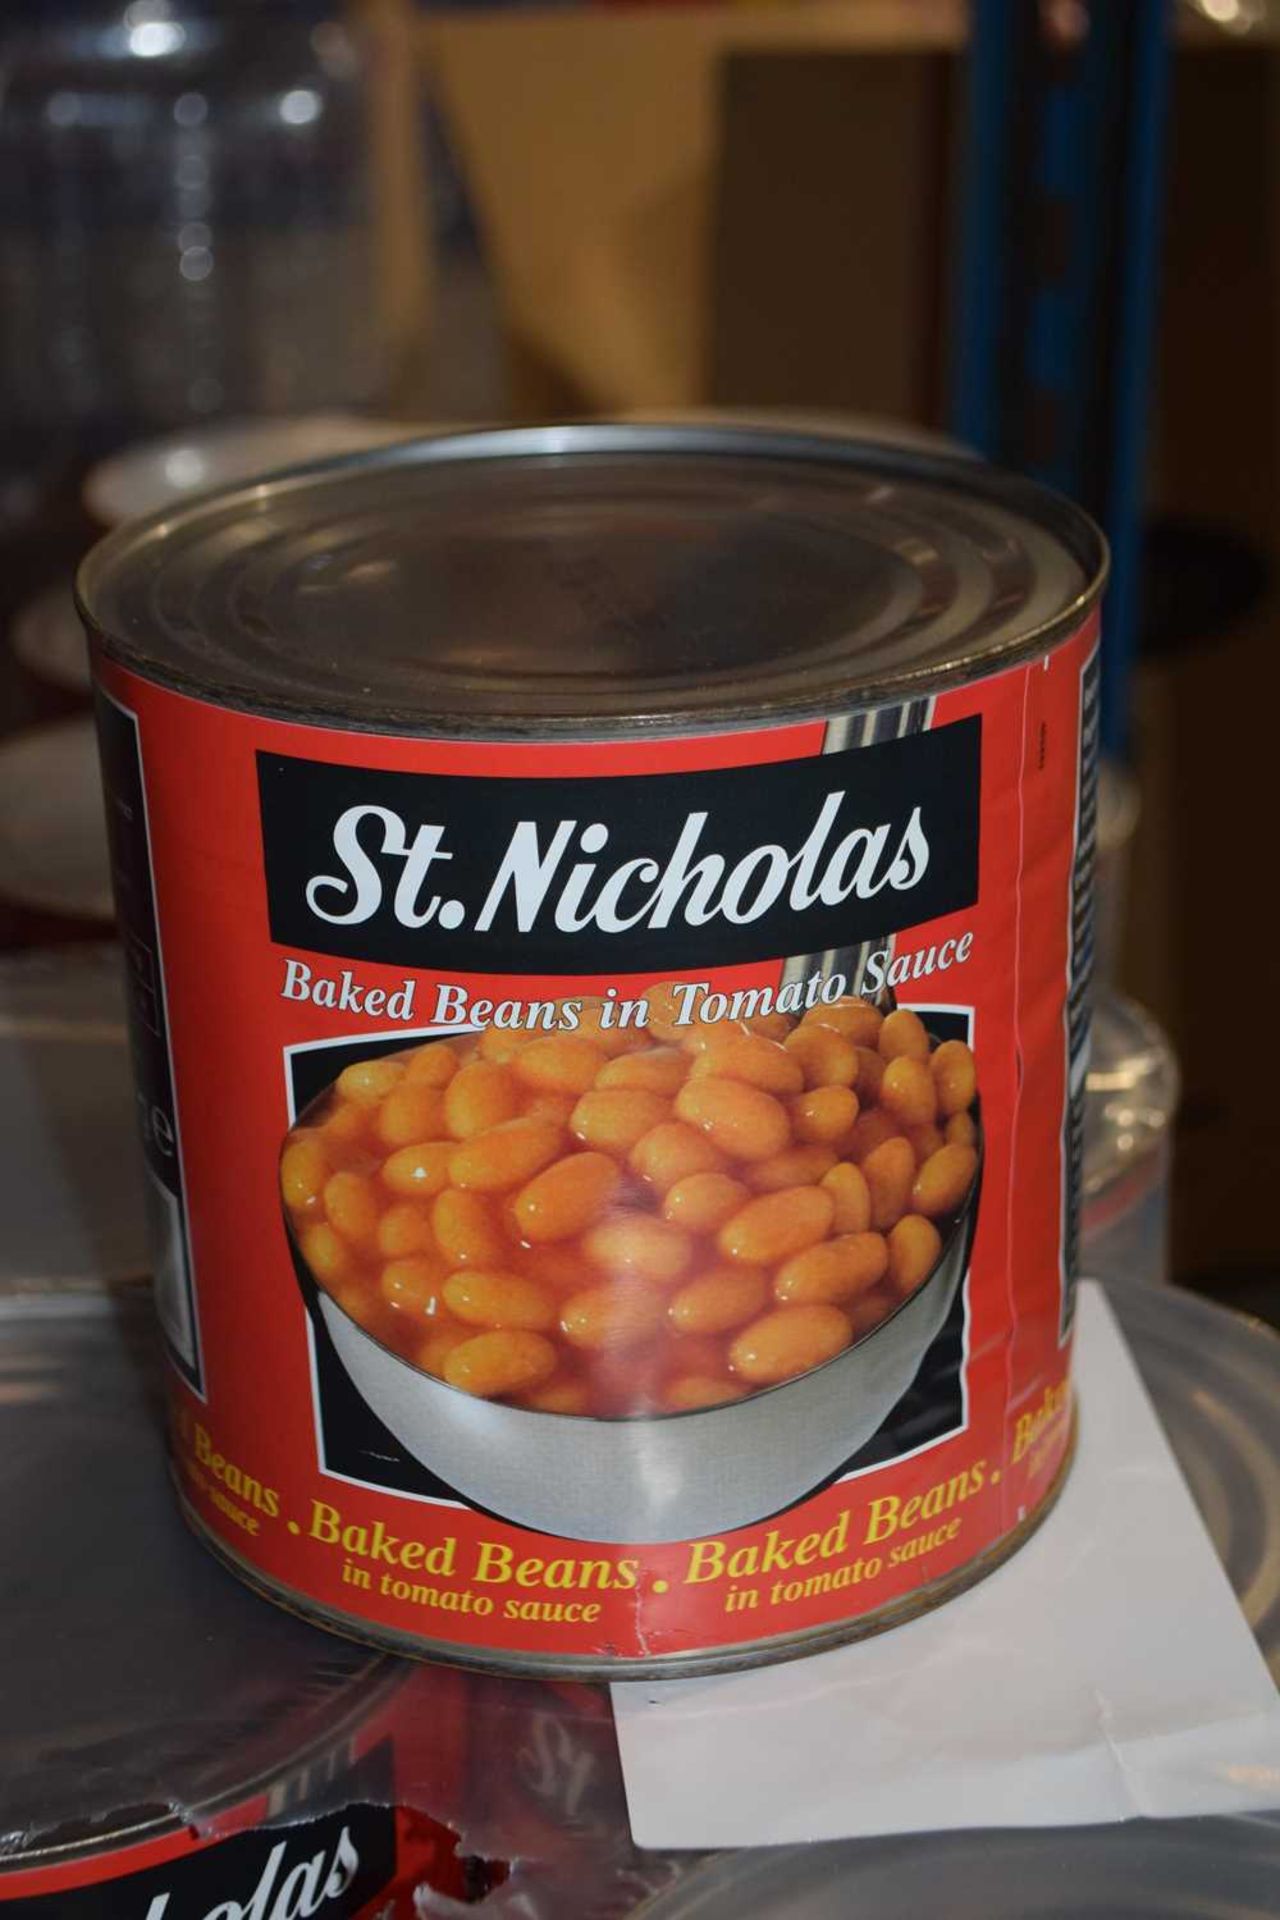 Six packs of St Nicholas Baked Beans in Tomato Sauce, 6x2.6kg tins per pack. Best Before Date: Jan - Image 2 of 3